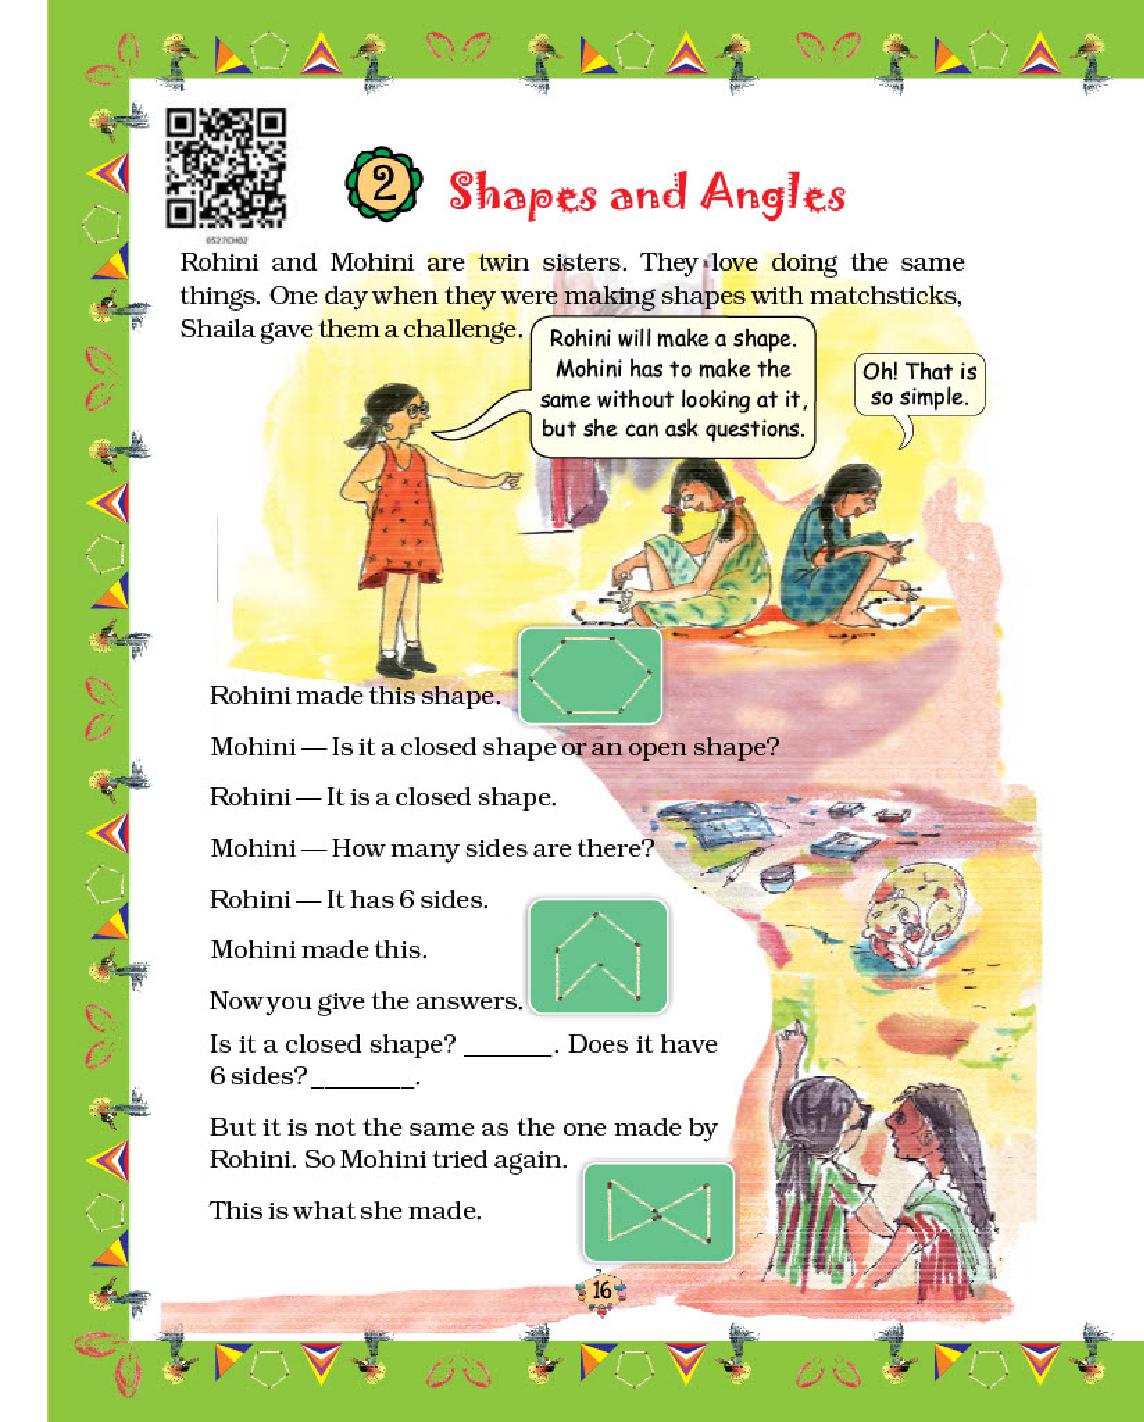 NCERT Book Class 5 Maths Chapter 2 Shapes and Angles - Page 1